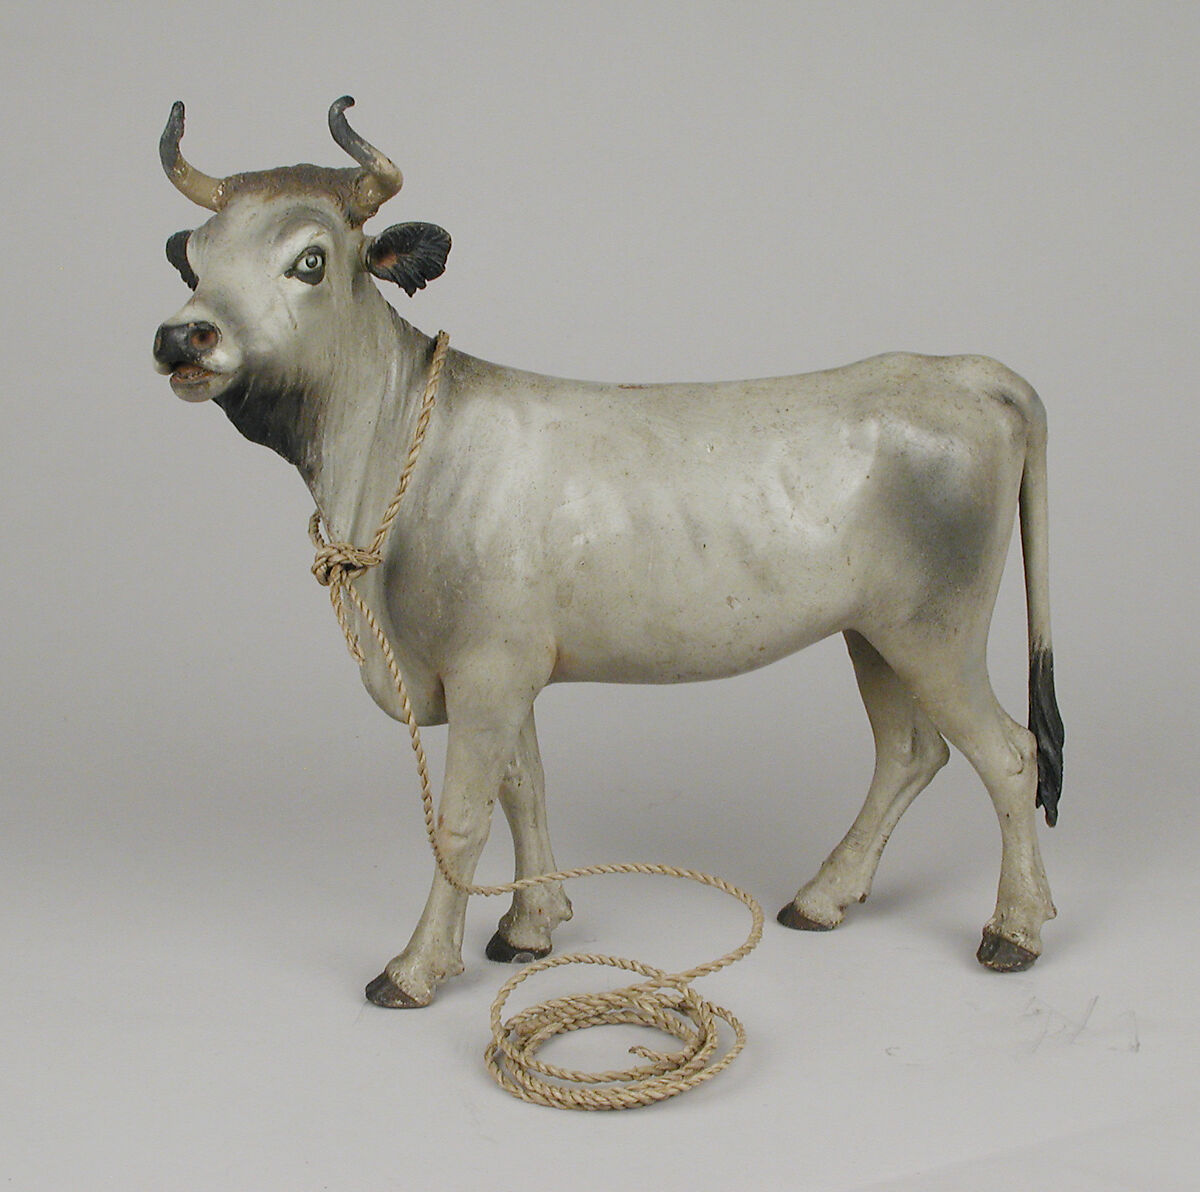 Young bull, Francesco Gallo, Polychromed terracotta body with wooden legs, tail and horns